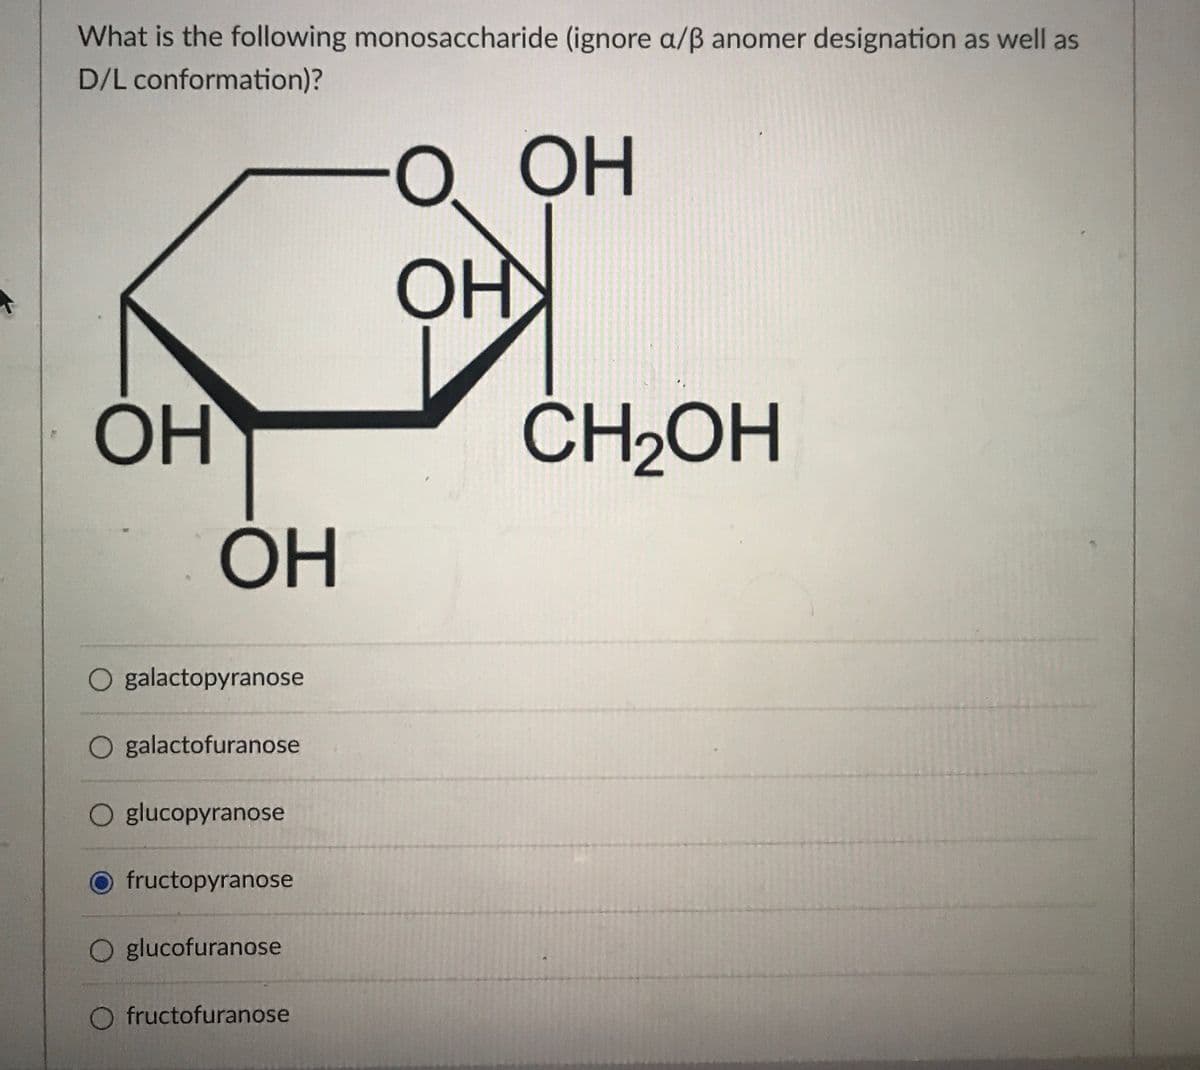 What is the following monosaccharide (ignore a/ß anomer designation as well as
D/L conformation)?
OH
О ОН
OH
OH
CH2OH
он
O galactopyranose
O galactofuranose
O glucopyranose
fructopyranose
O glucofuranose
O fructofuranose
